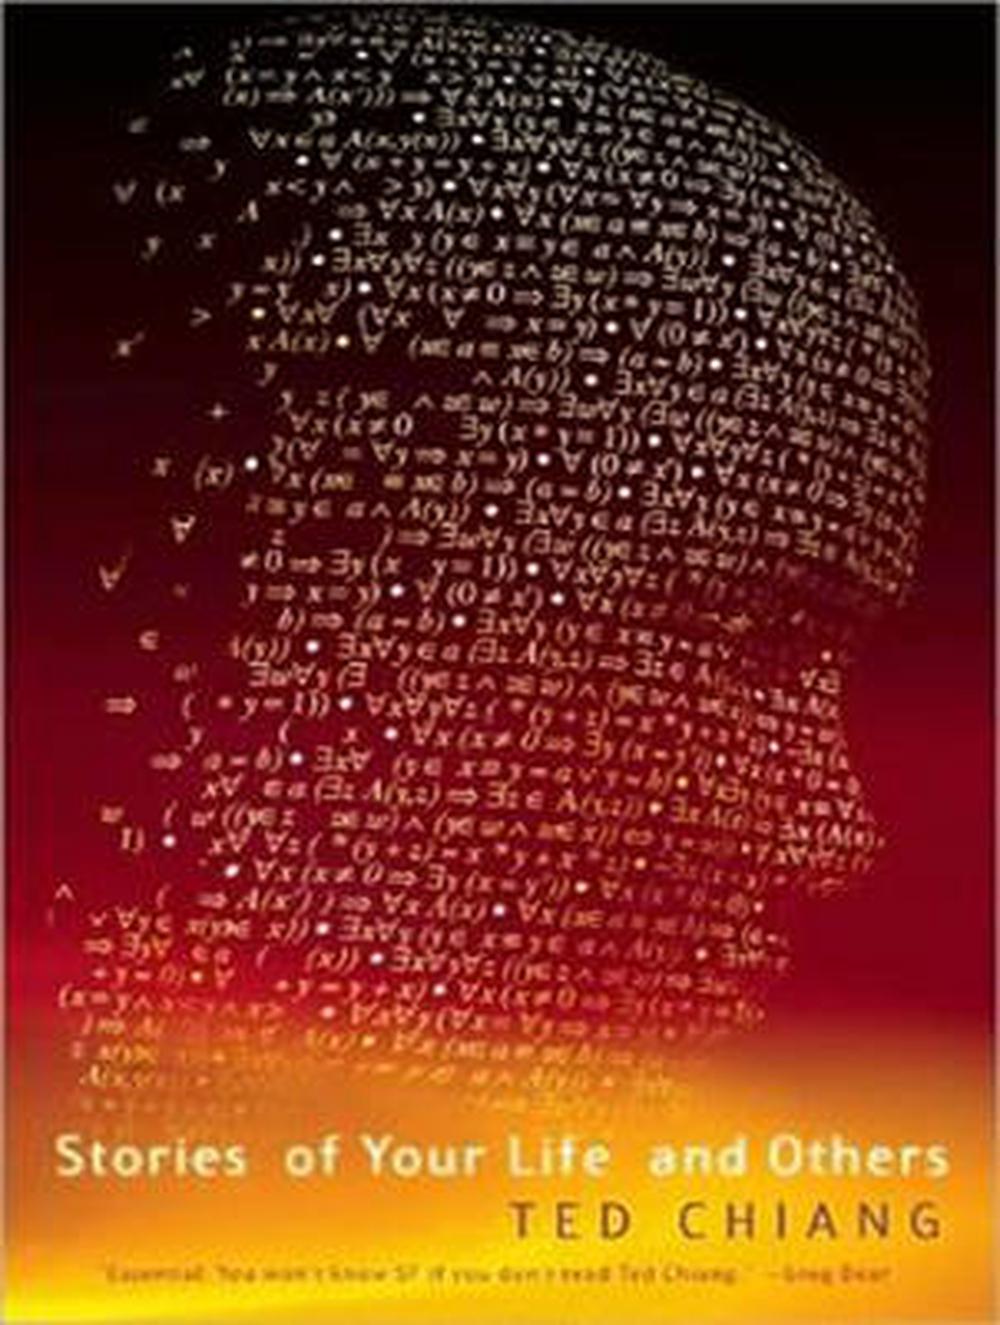 story of your life by ted chiang pdf download